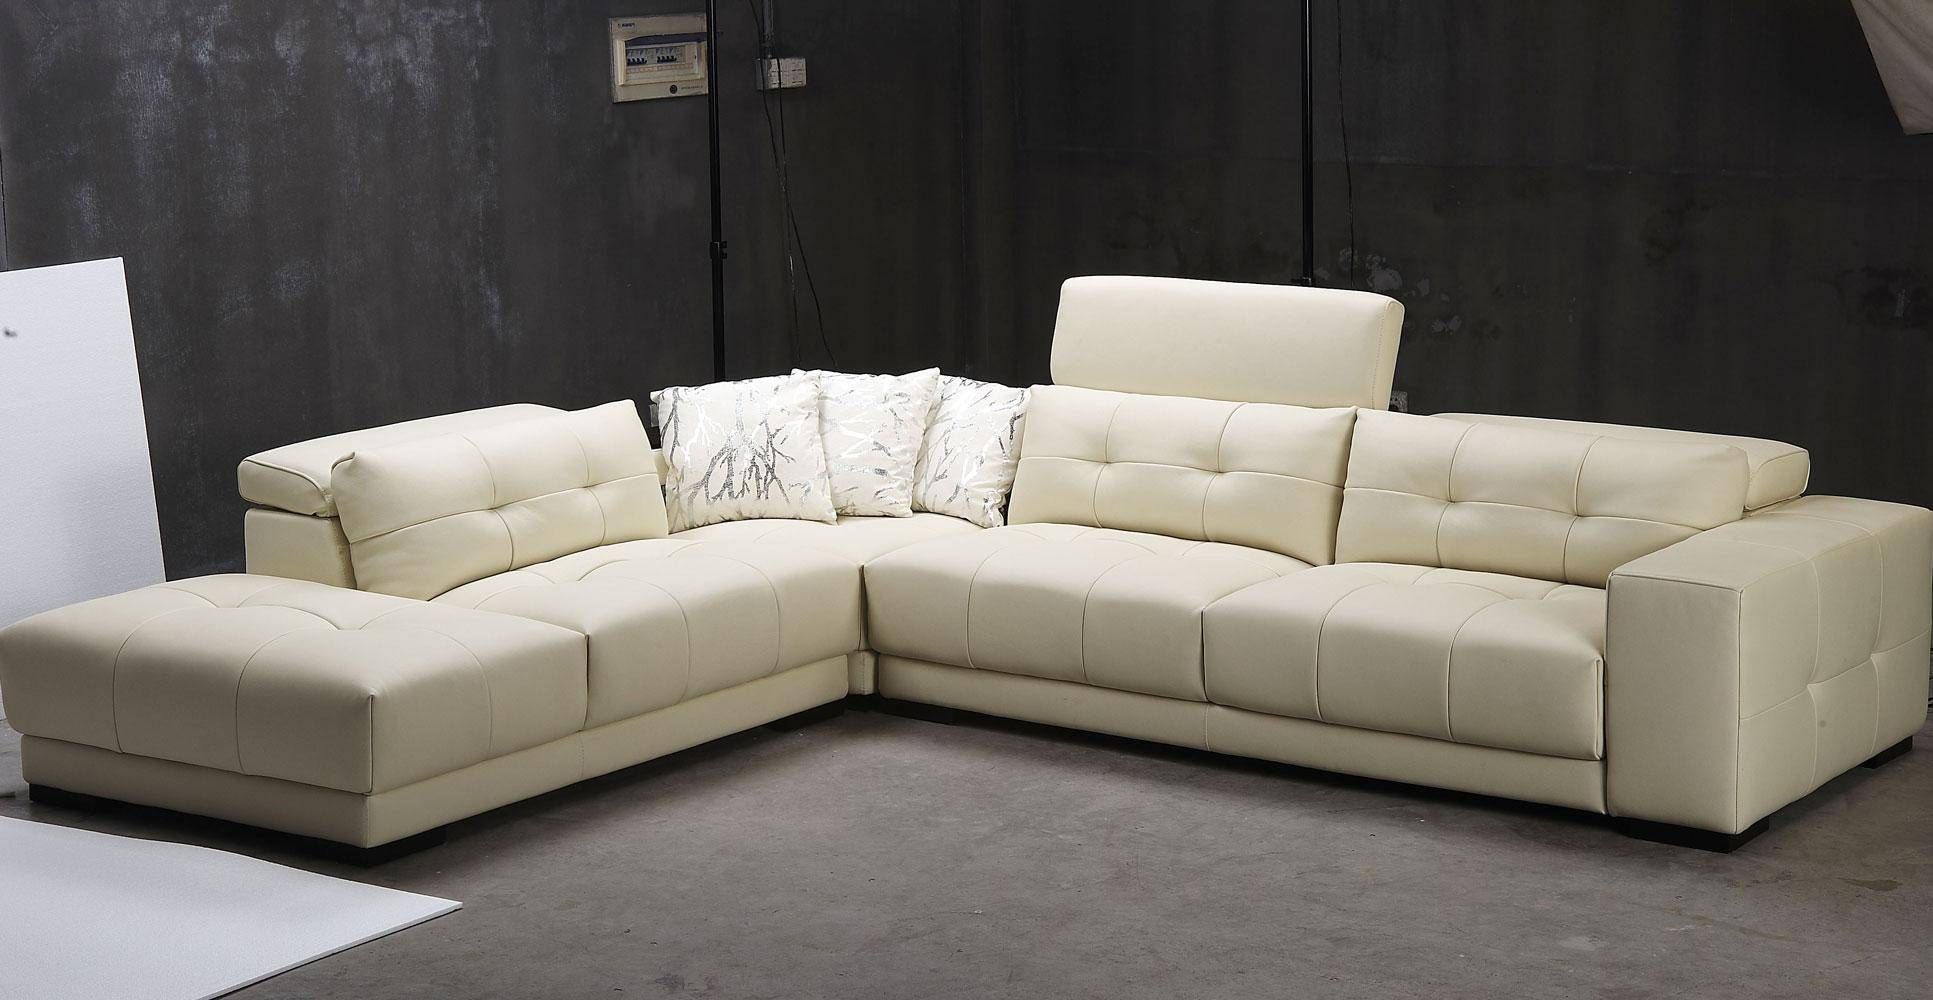 Modern Sofa Sectionals Modern With Quality Leather L Shape Throughout Quality Sectional Sofa (View 29 of 30)